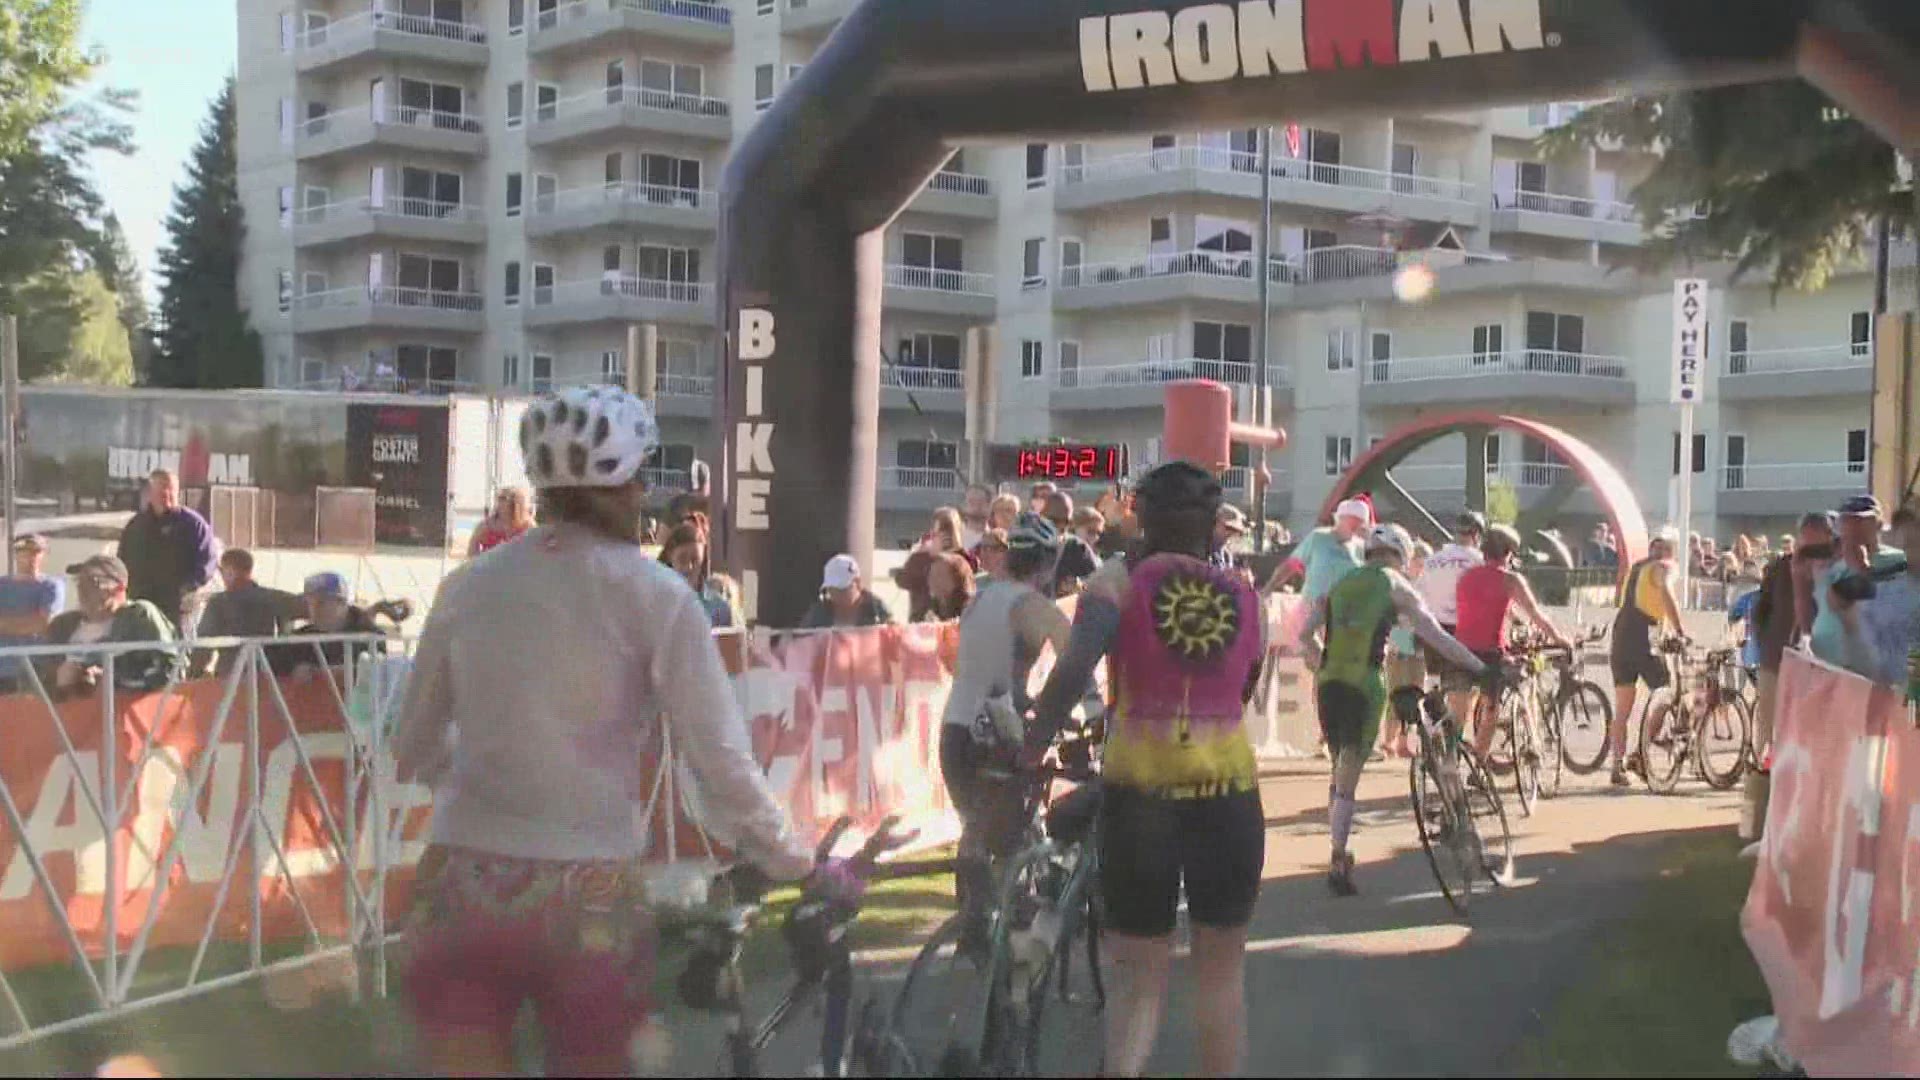 The full distance Ironman, last held in Coeur d'Alene in 2017, includes a 2.4-mile swim, a 112-mile bike ride and a 26.2-mile run.